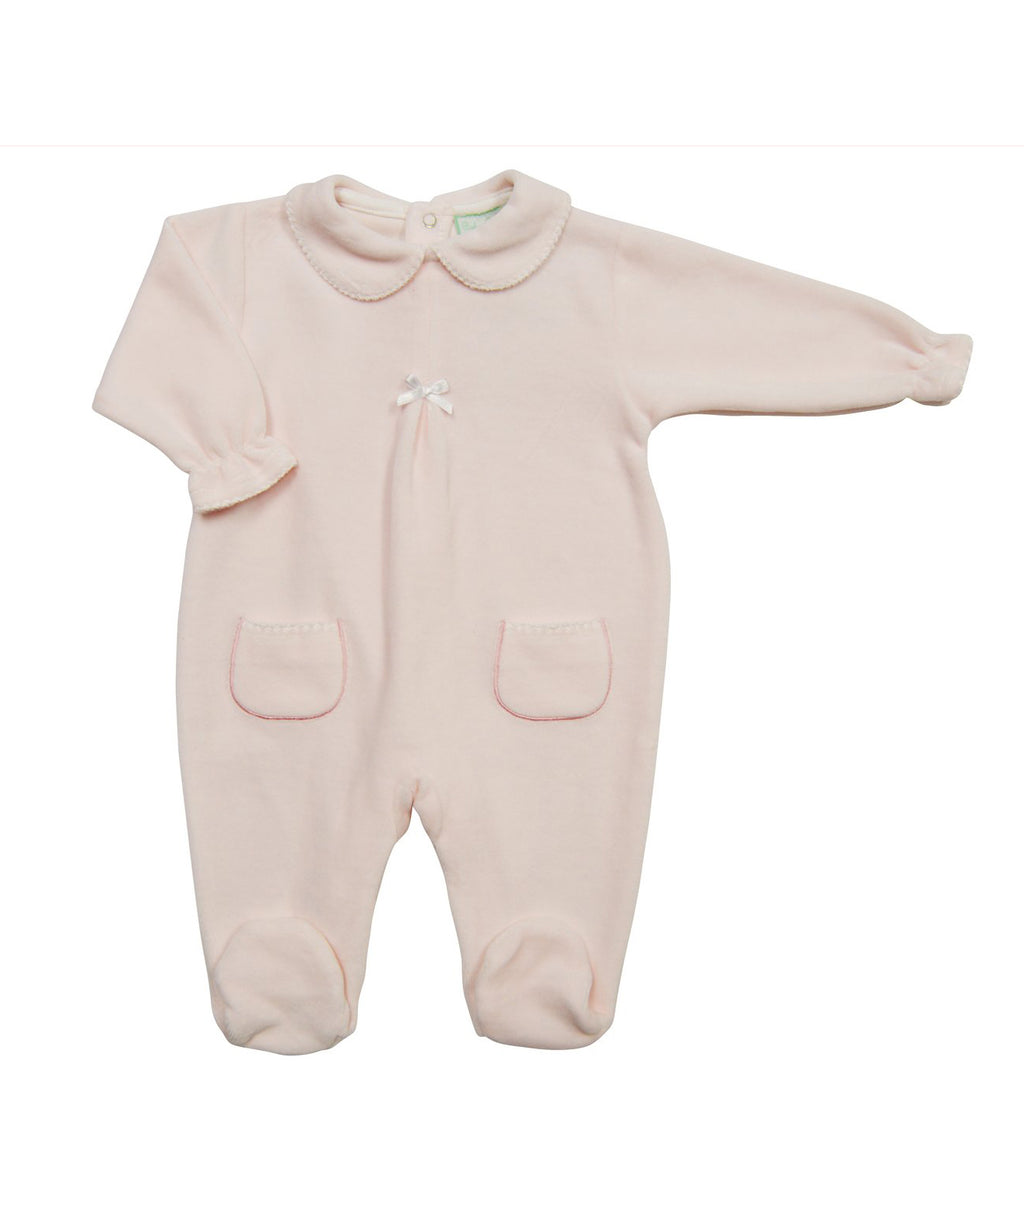 Pink Velour Footie with Pockets - Little Threads Inc. Children's Clothing